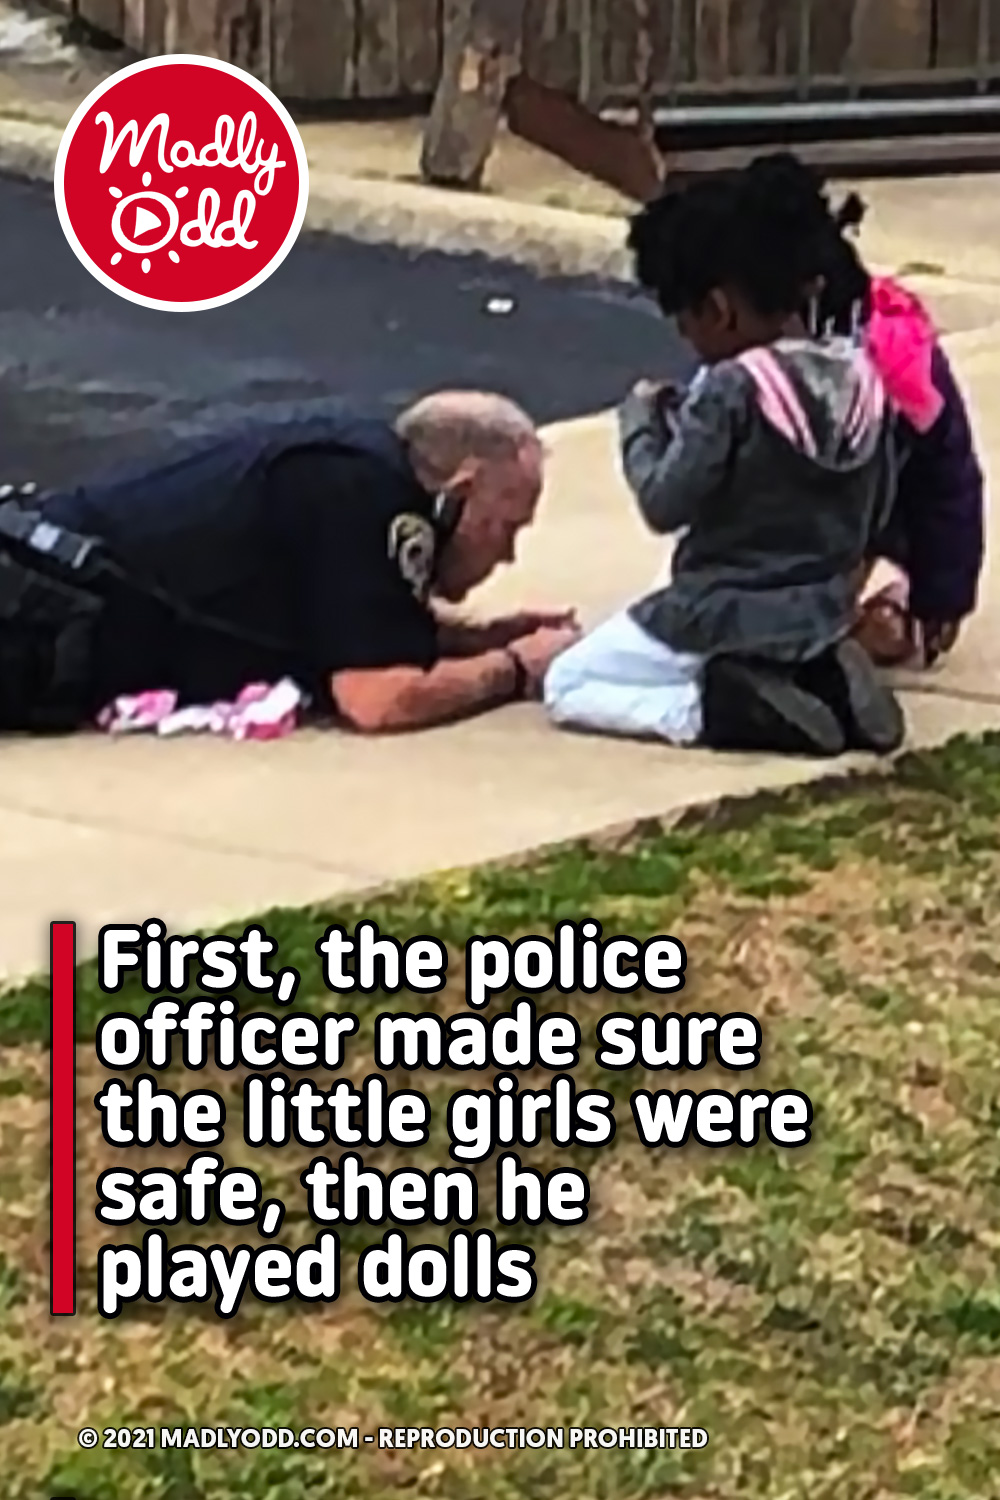 First, the police officer made sure the little girls were safe, then he played dolls